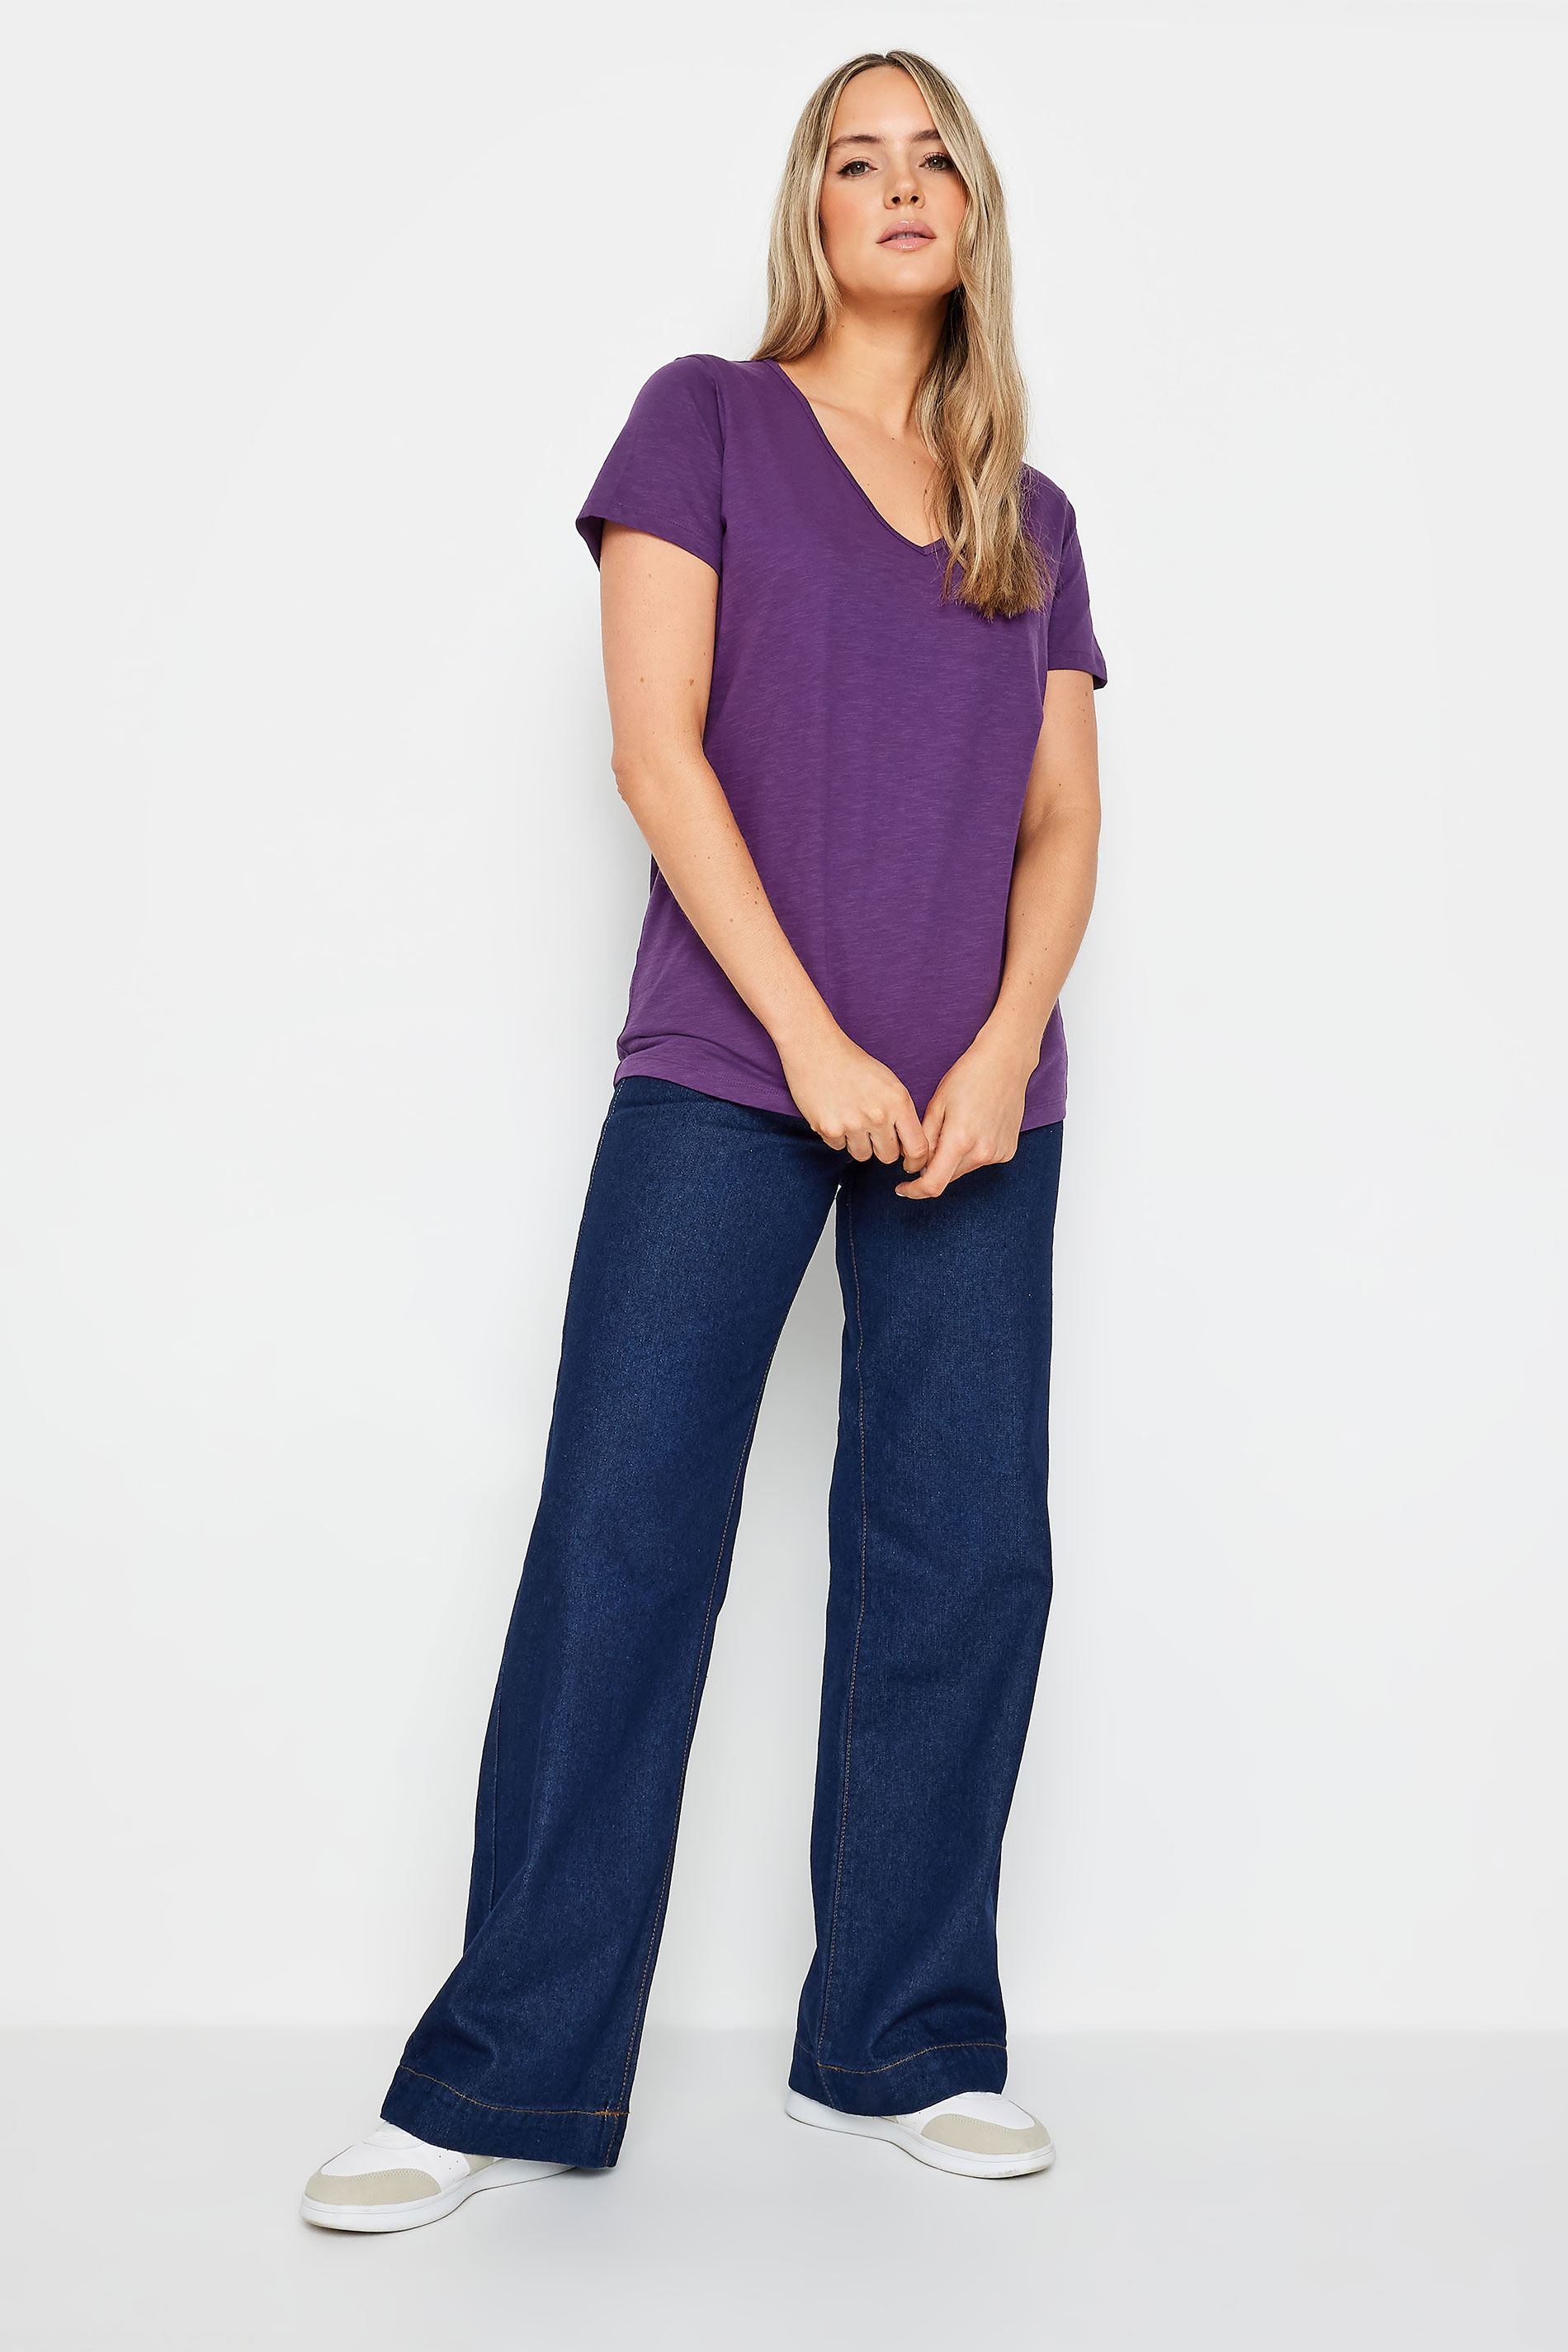 Short Sleeve V-Neck in Smoked Mauve - Shirts for Tall Women